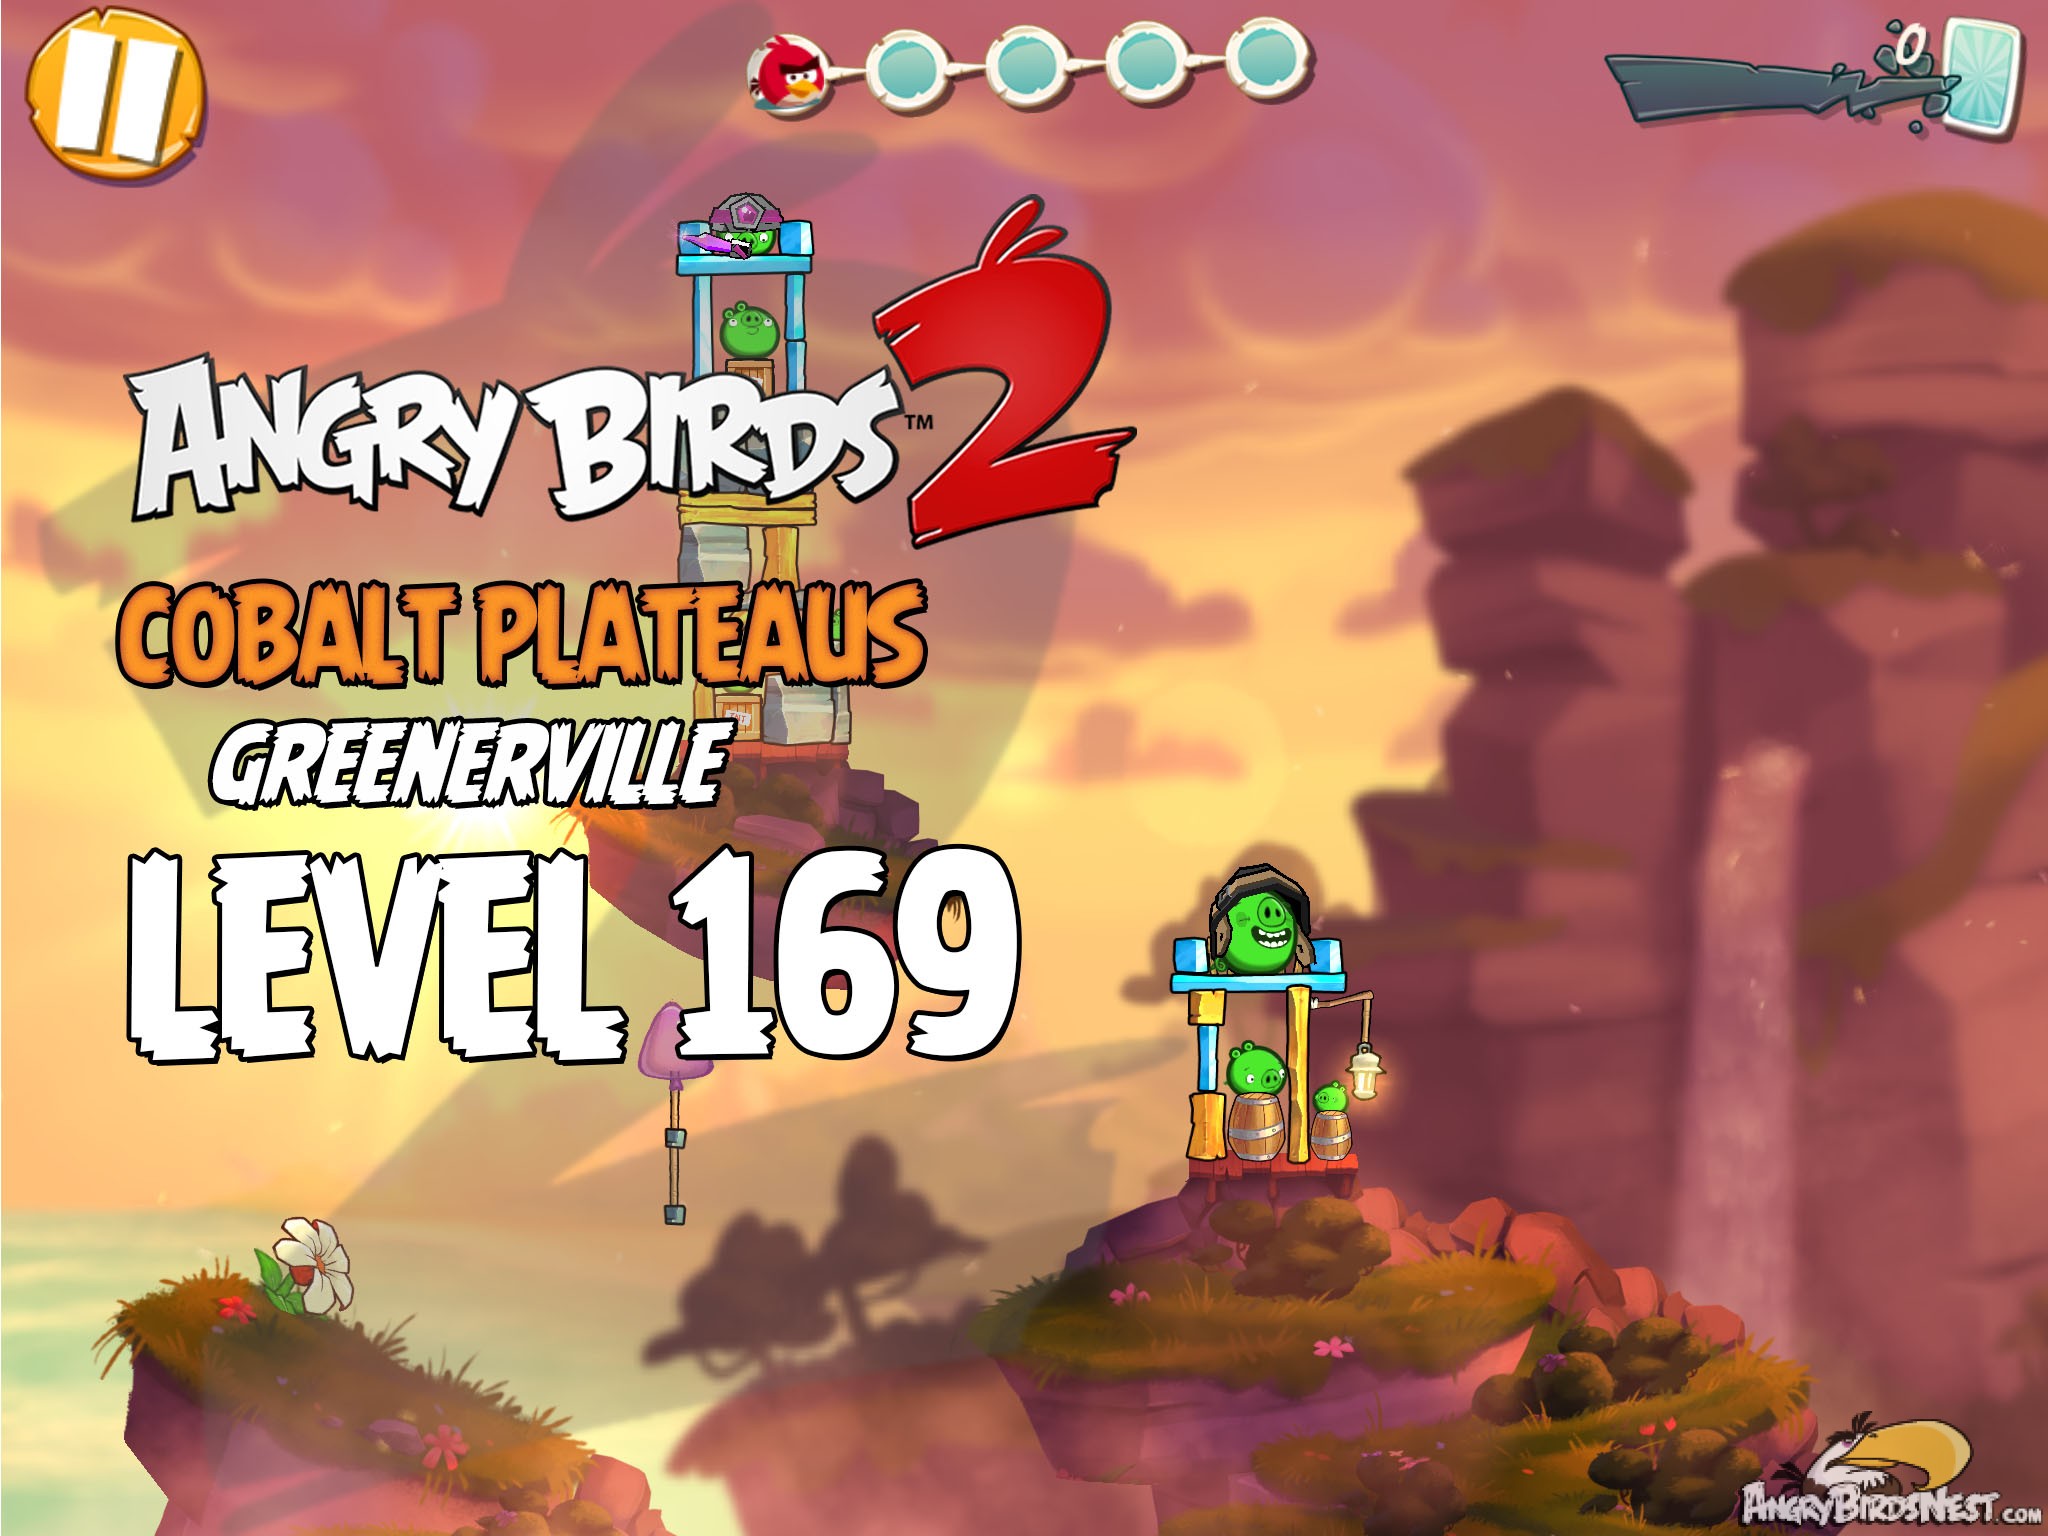 Angry Birds 2 Cobalt Plateaus Greenerville Level 169